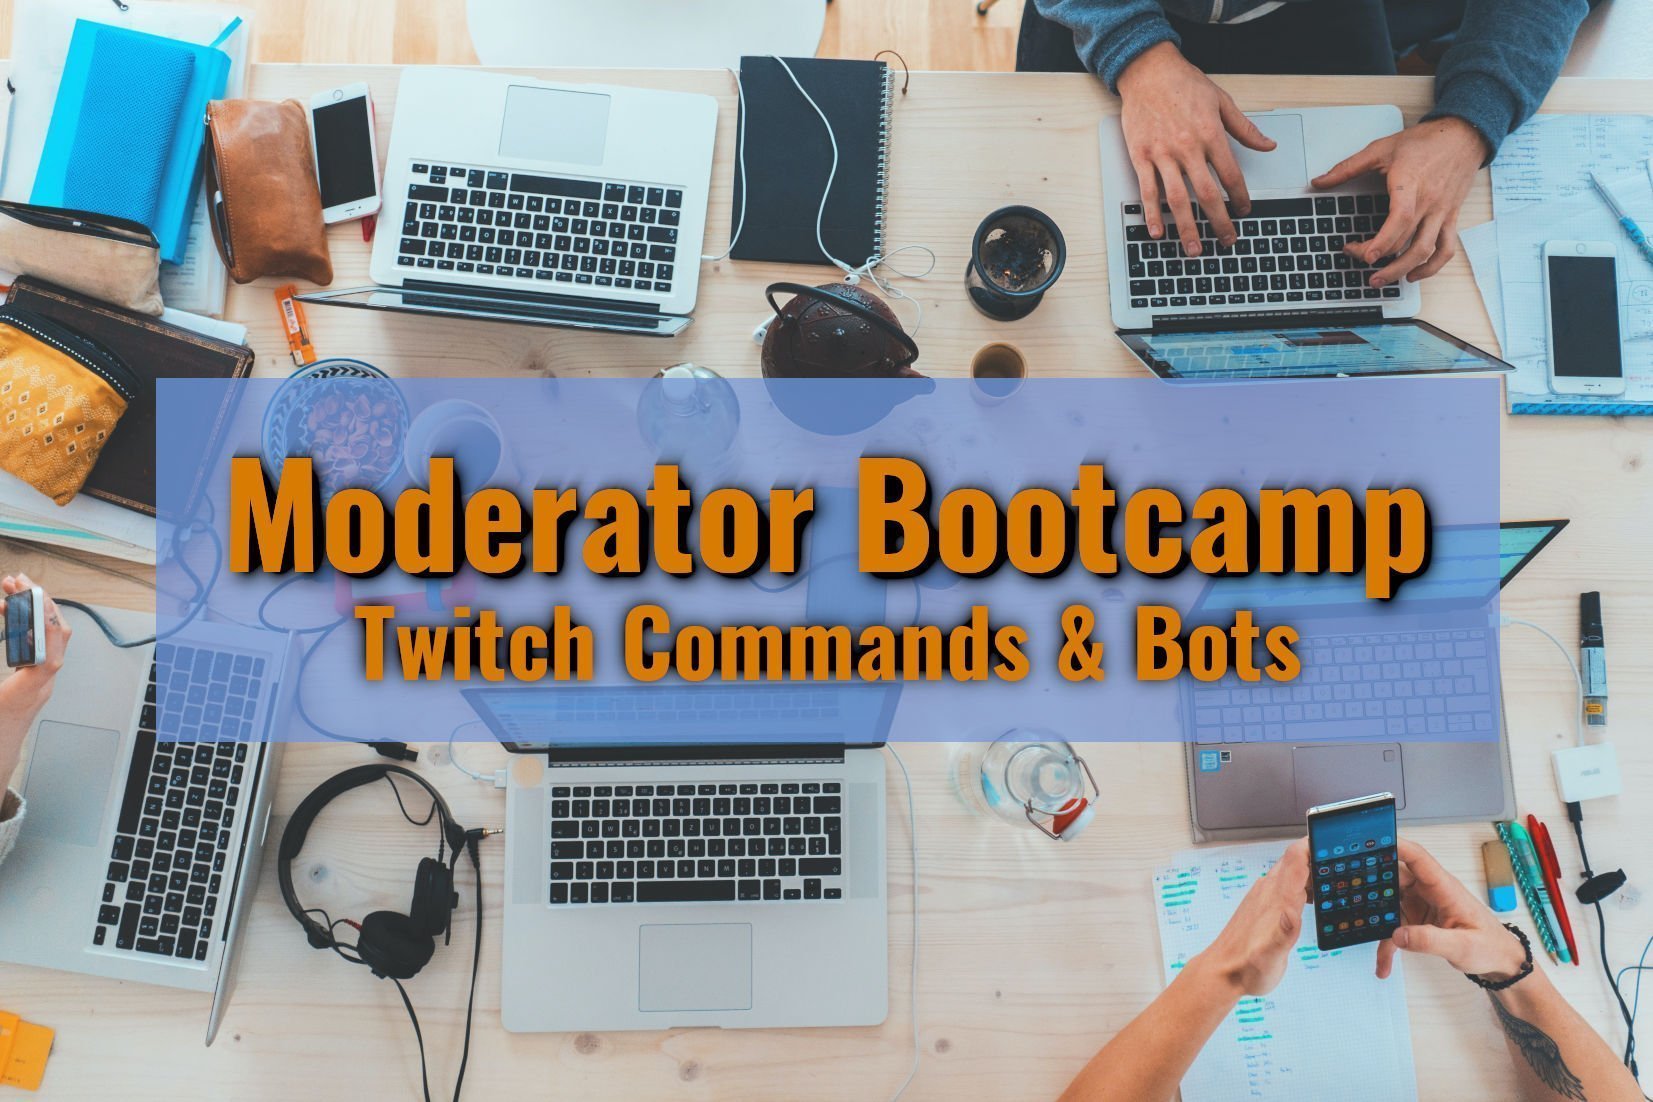 Welcome To Moderator Bootcamp Twitch Commands Bots